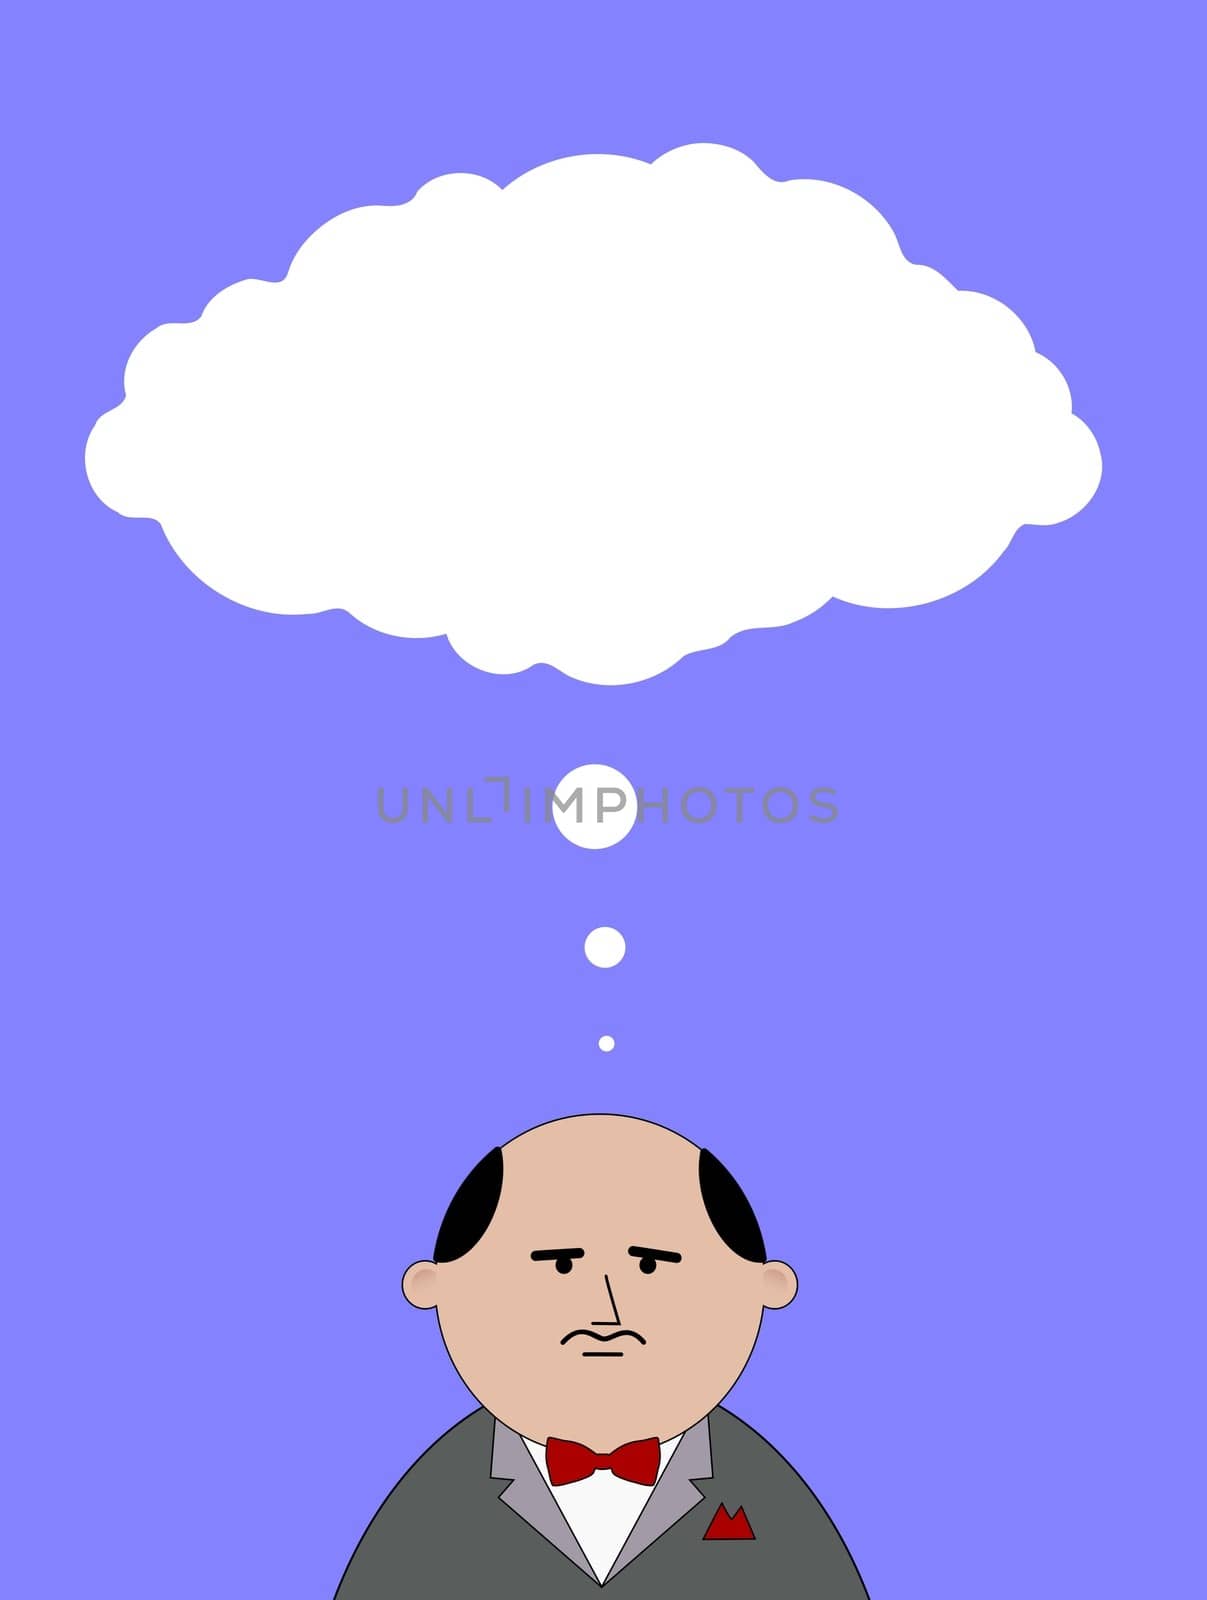 Illustration of a cartoon man with thought bubbles